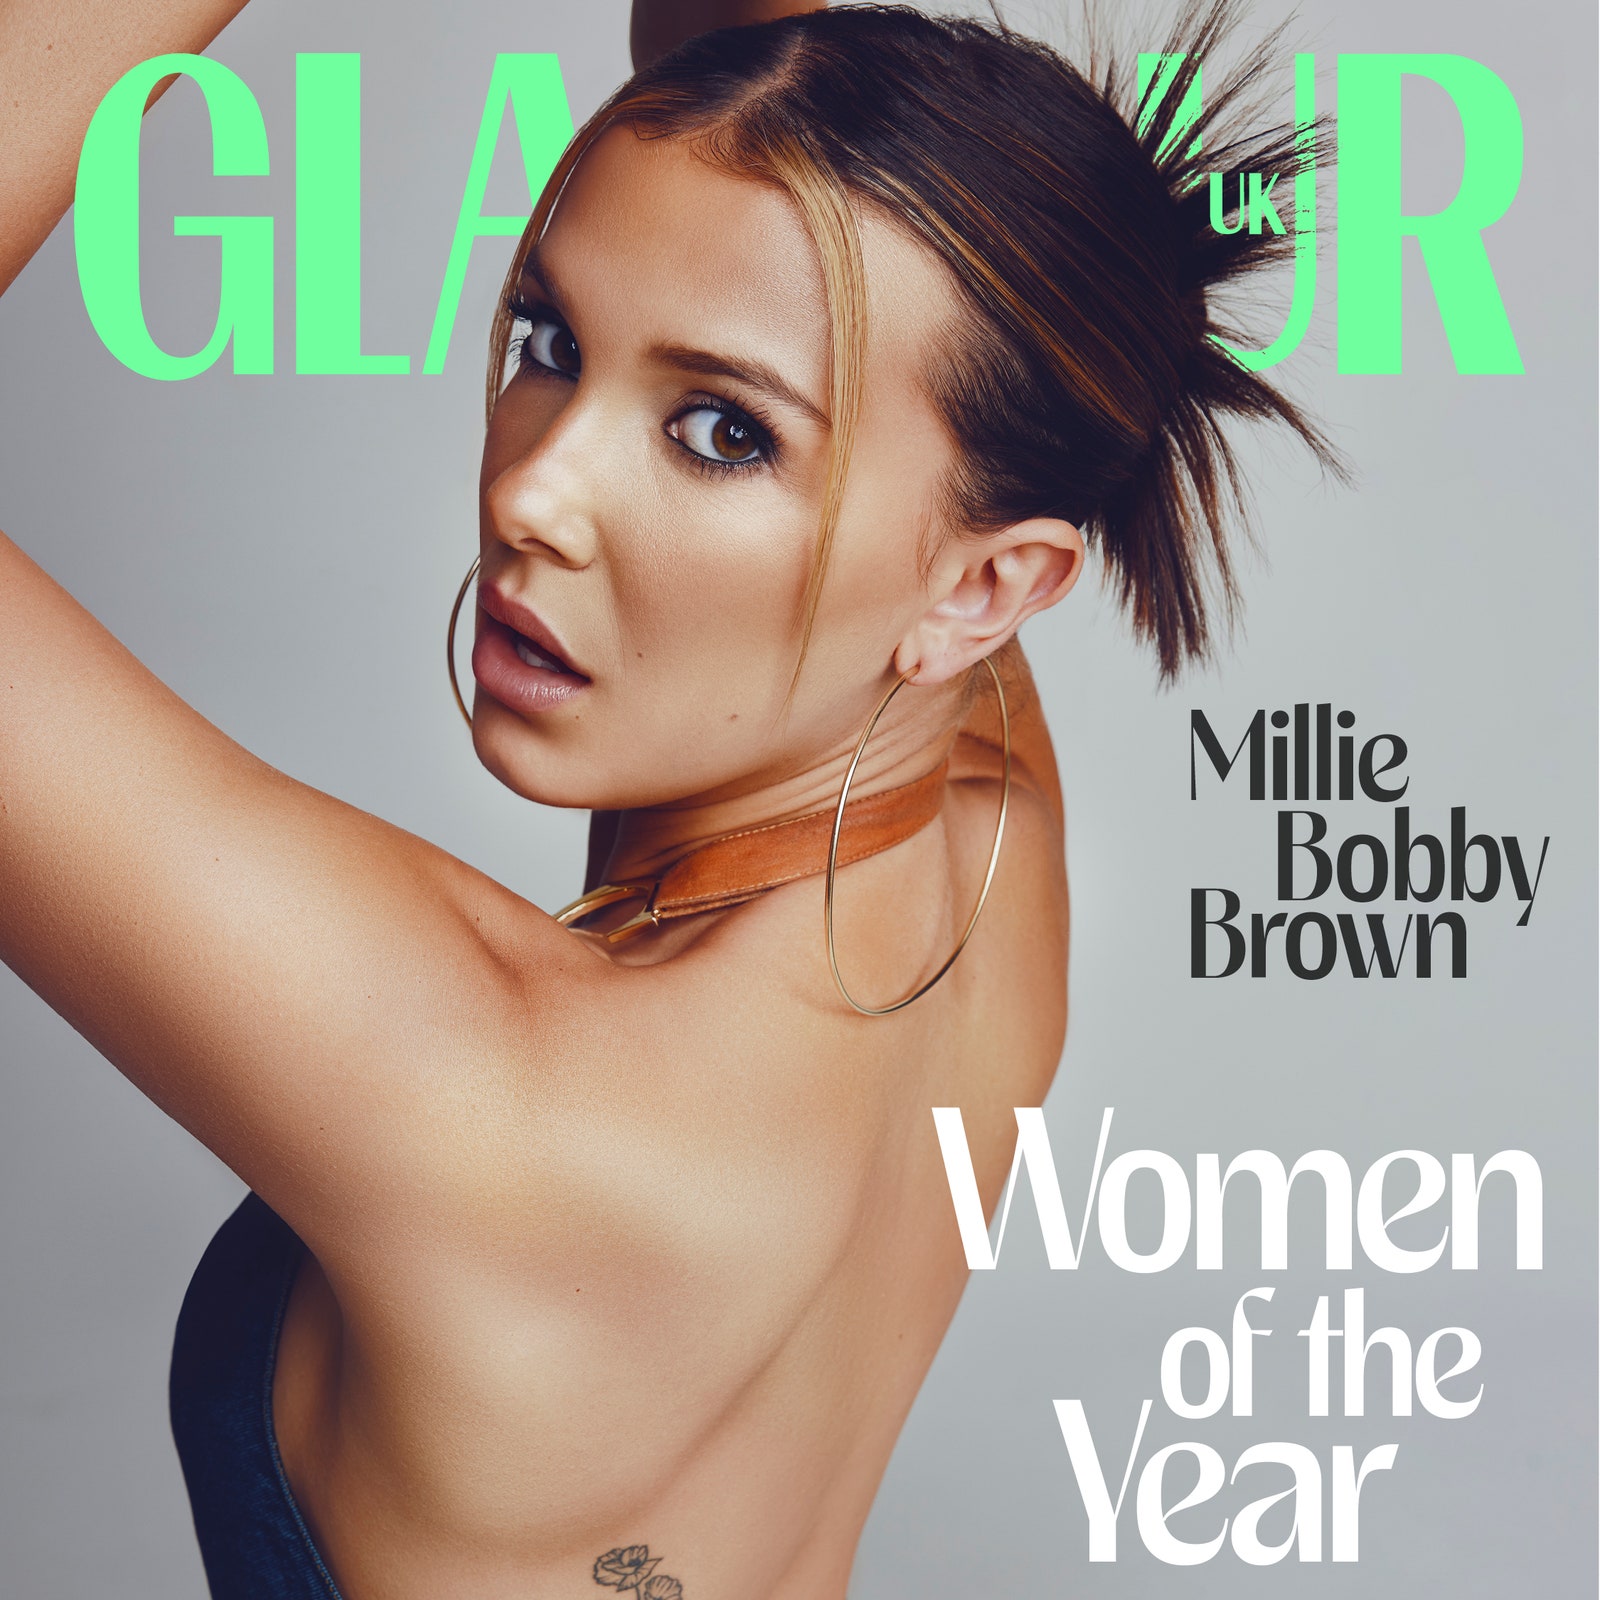 Millie Bobby Brown on feminism, finding ‘The One’ and saying goodbye to Stranger Things